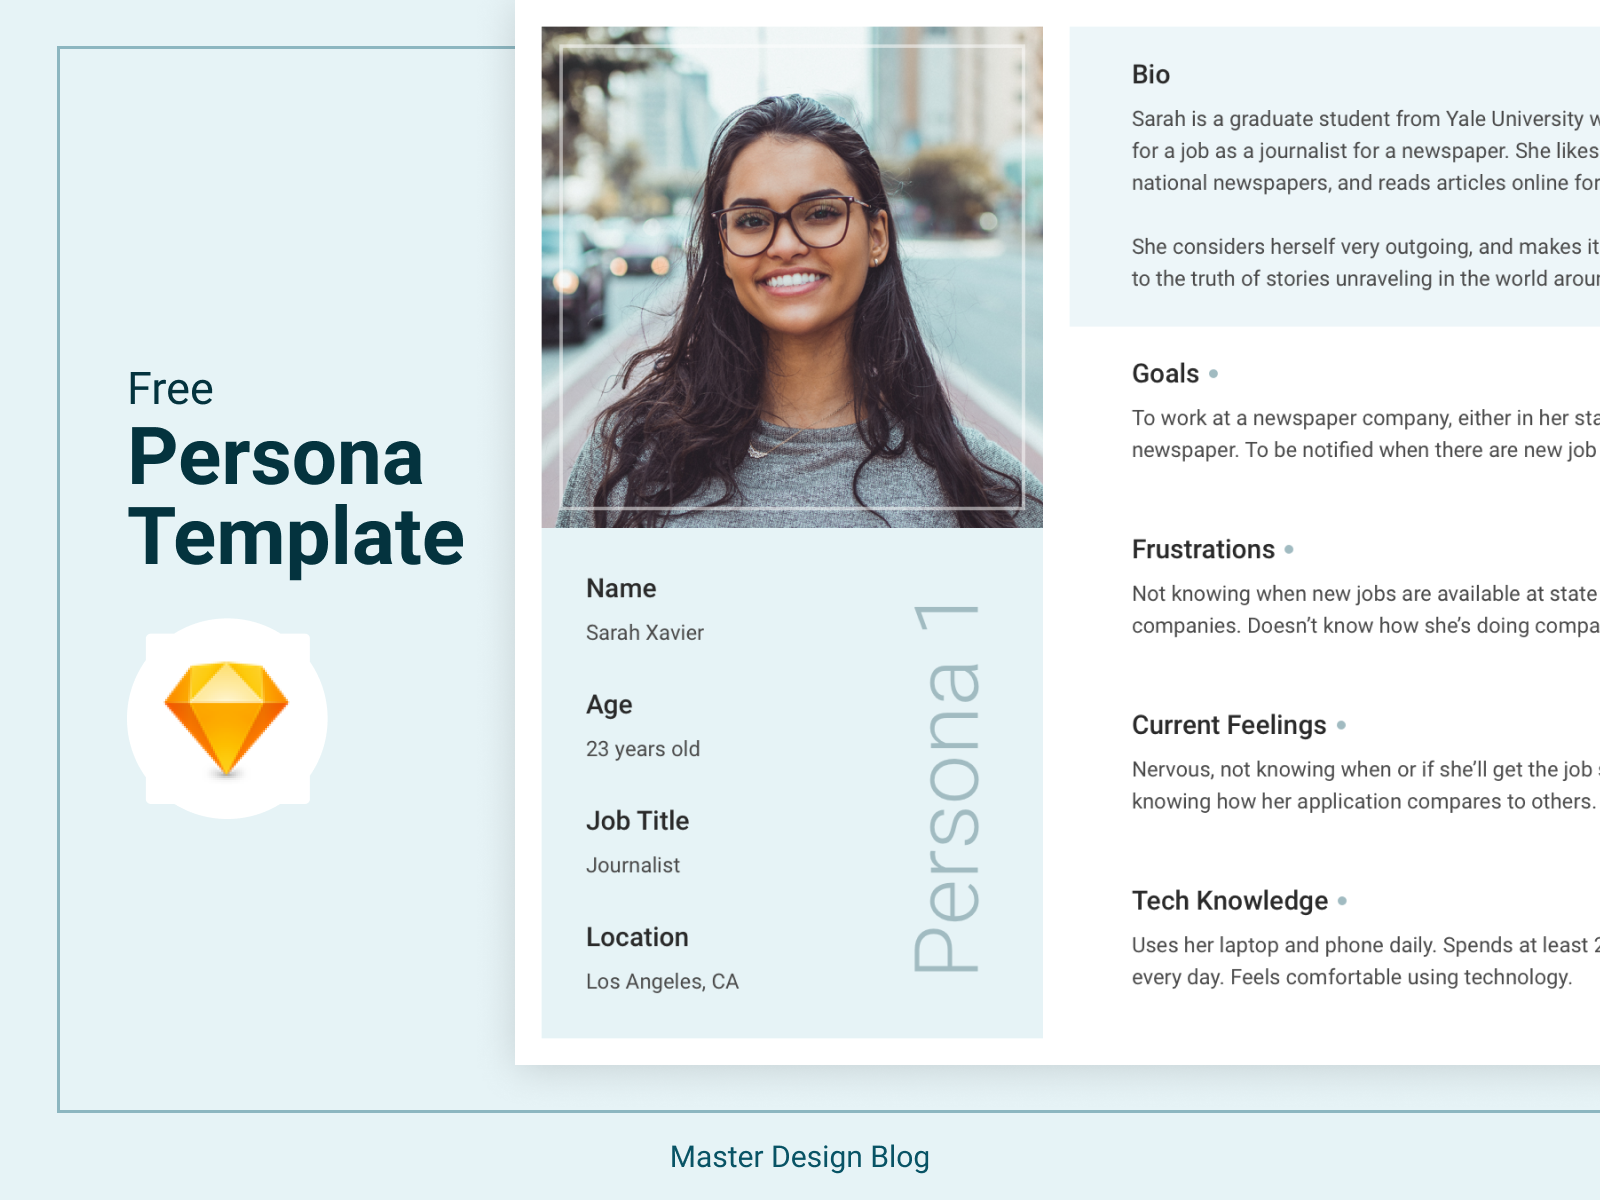 Free Persona Template Sketch by Alexander Georges on Dribbble